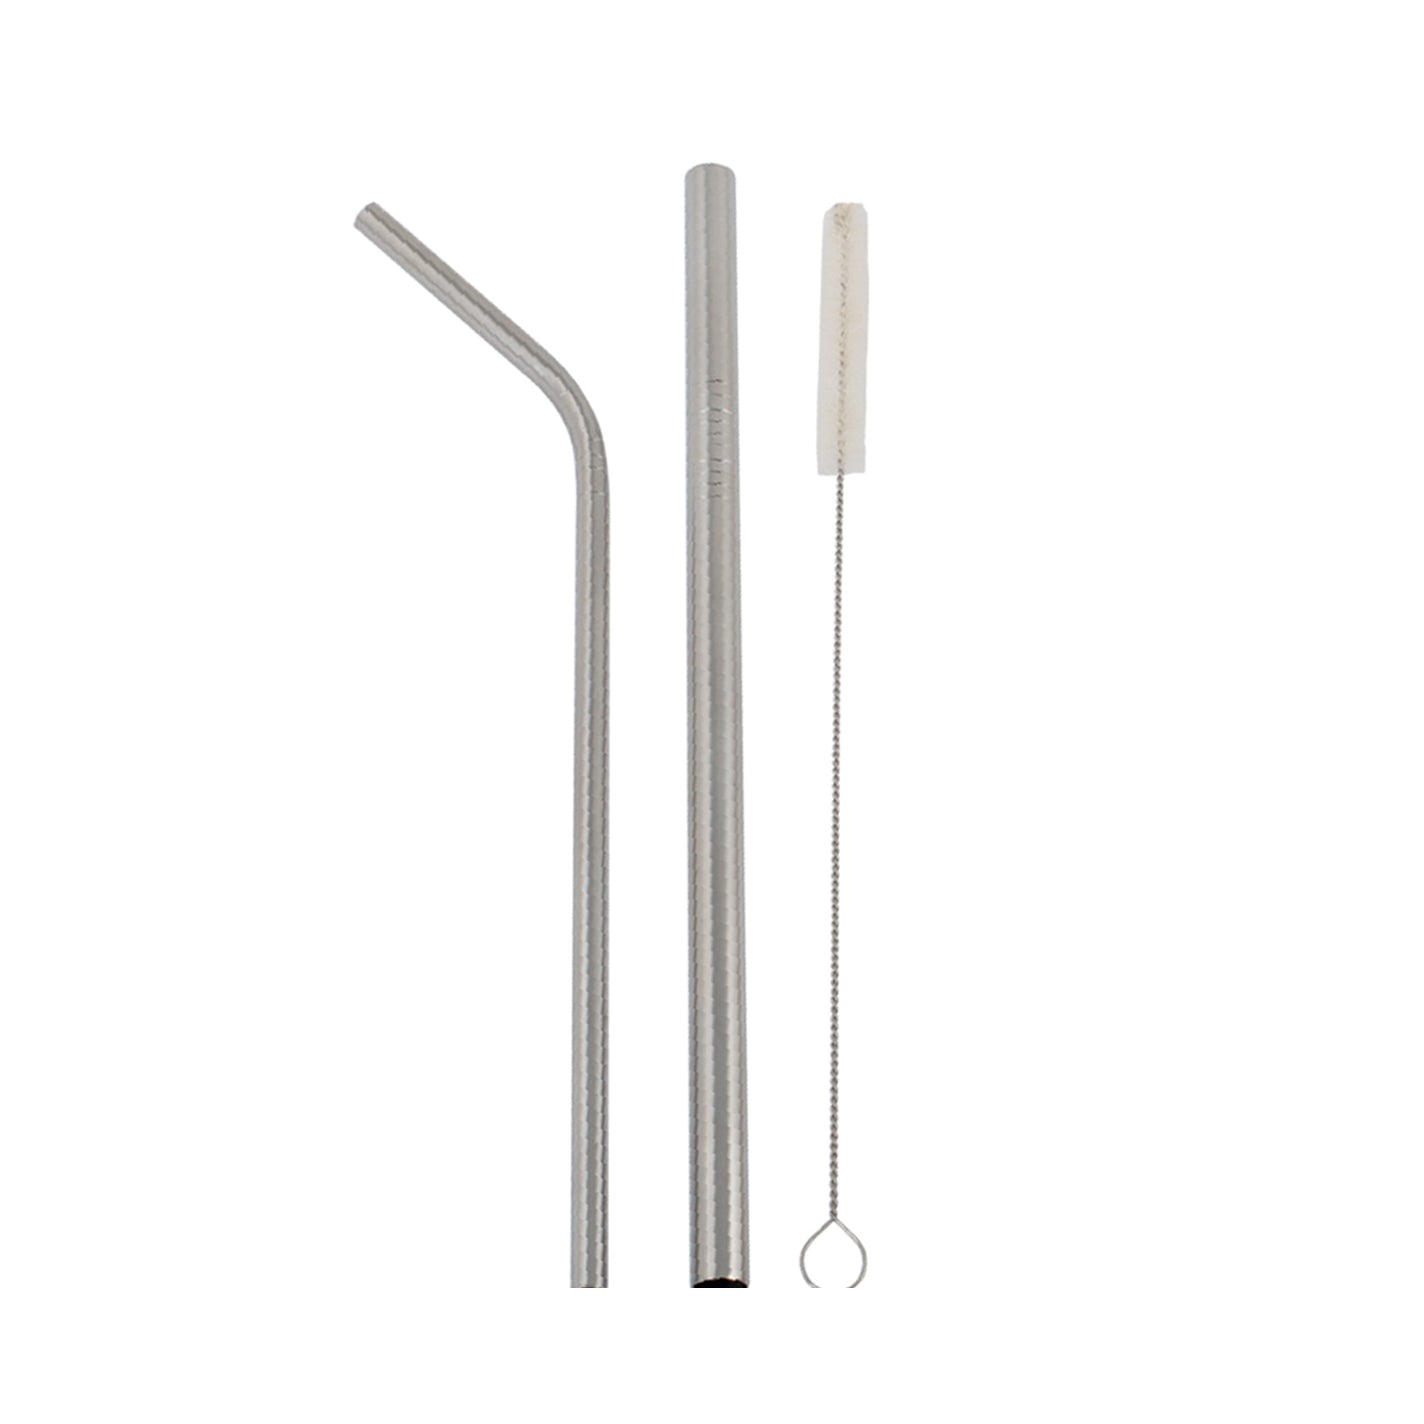 Redecker Steel Straw Duo + Cleaning Brush in Cotton Bag